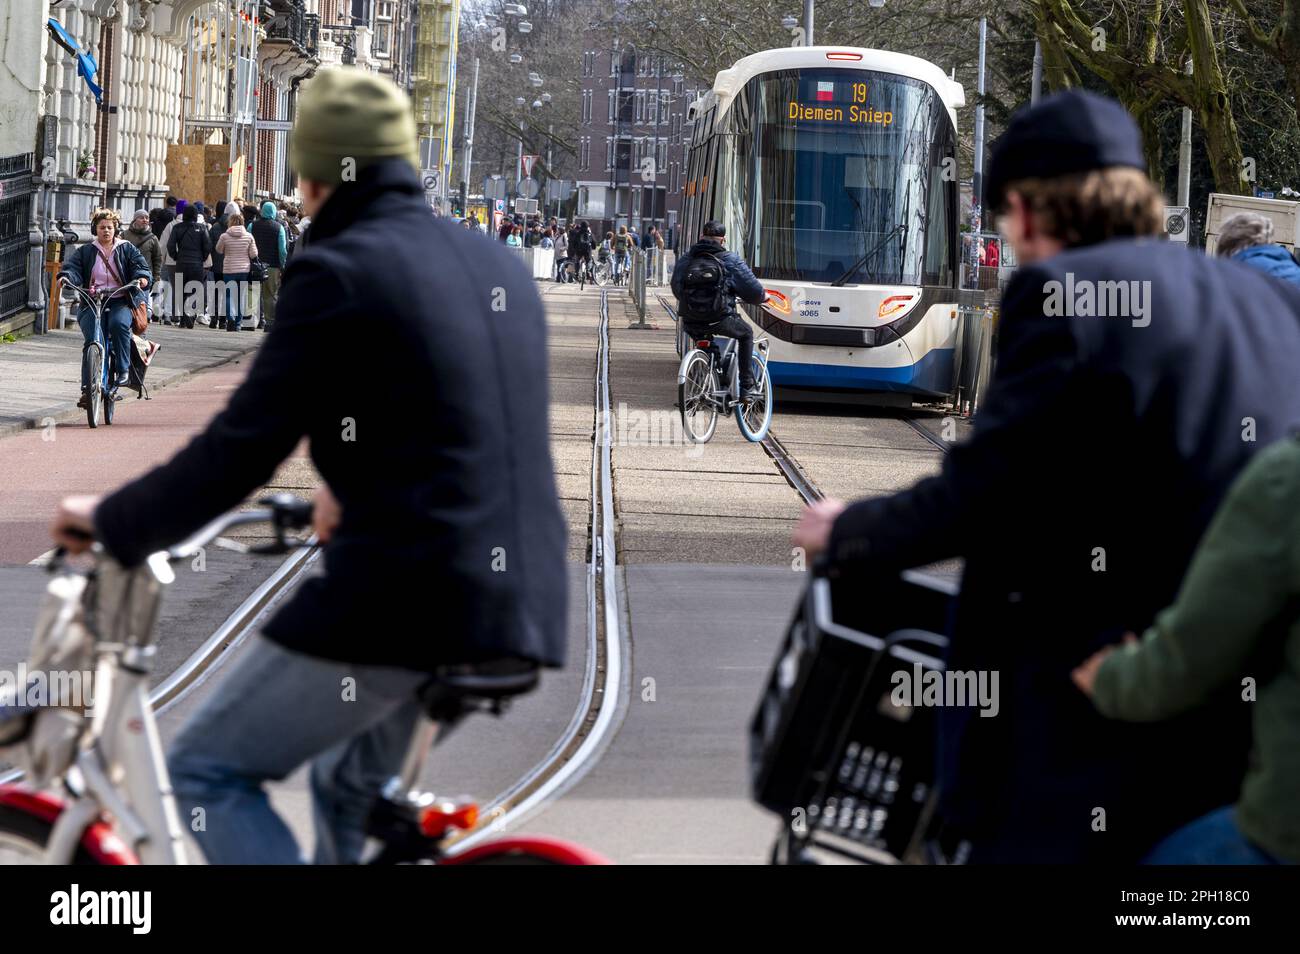 AMSTERDAM - Tram 19 in the center of Amsterdam. Public transport in the capital is being overhauled because the number of travelers has decreased due to the corona crisis. ANP EVERT ELZINGA netherlands out - belgium out Stock Photo